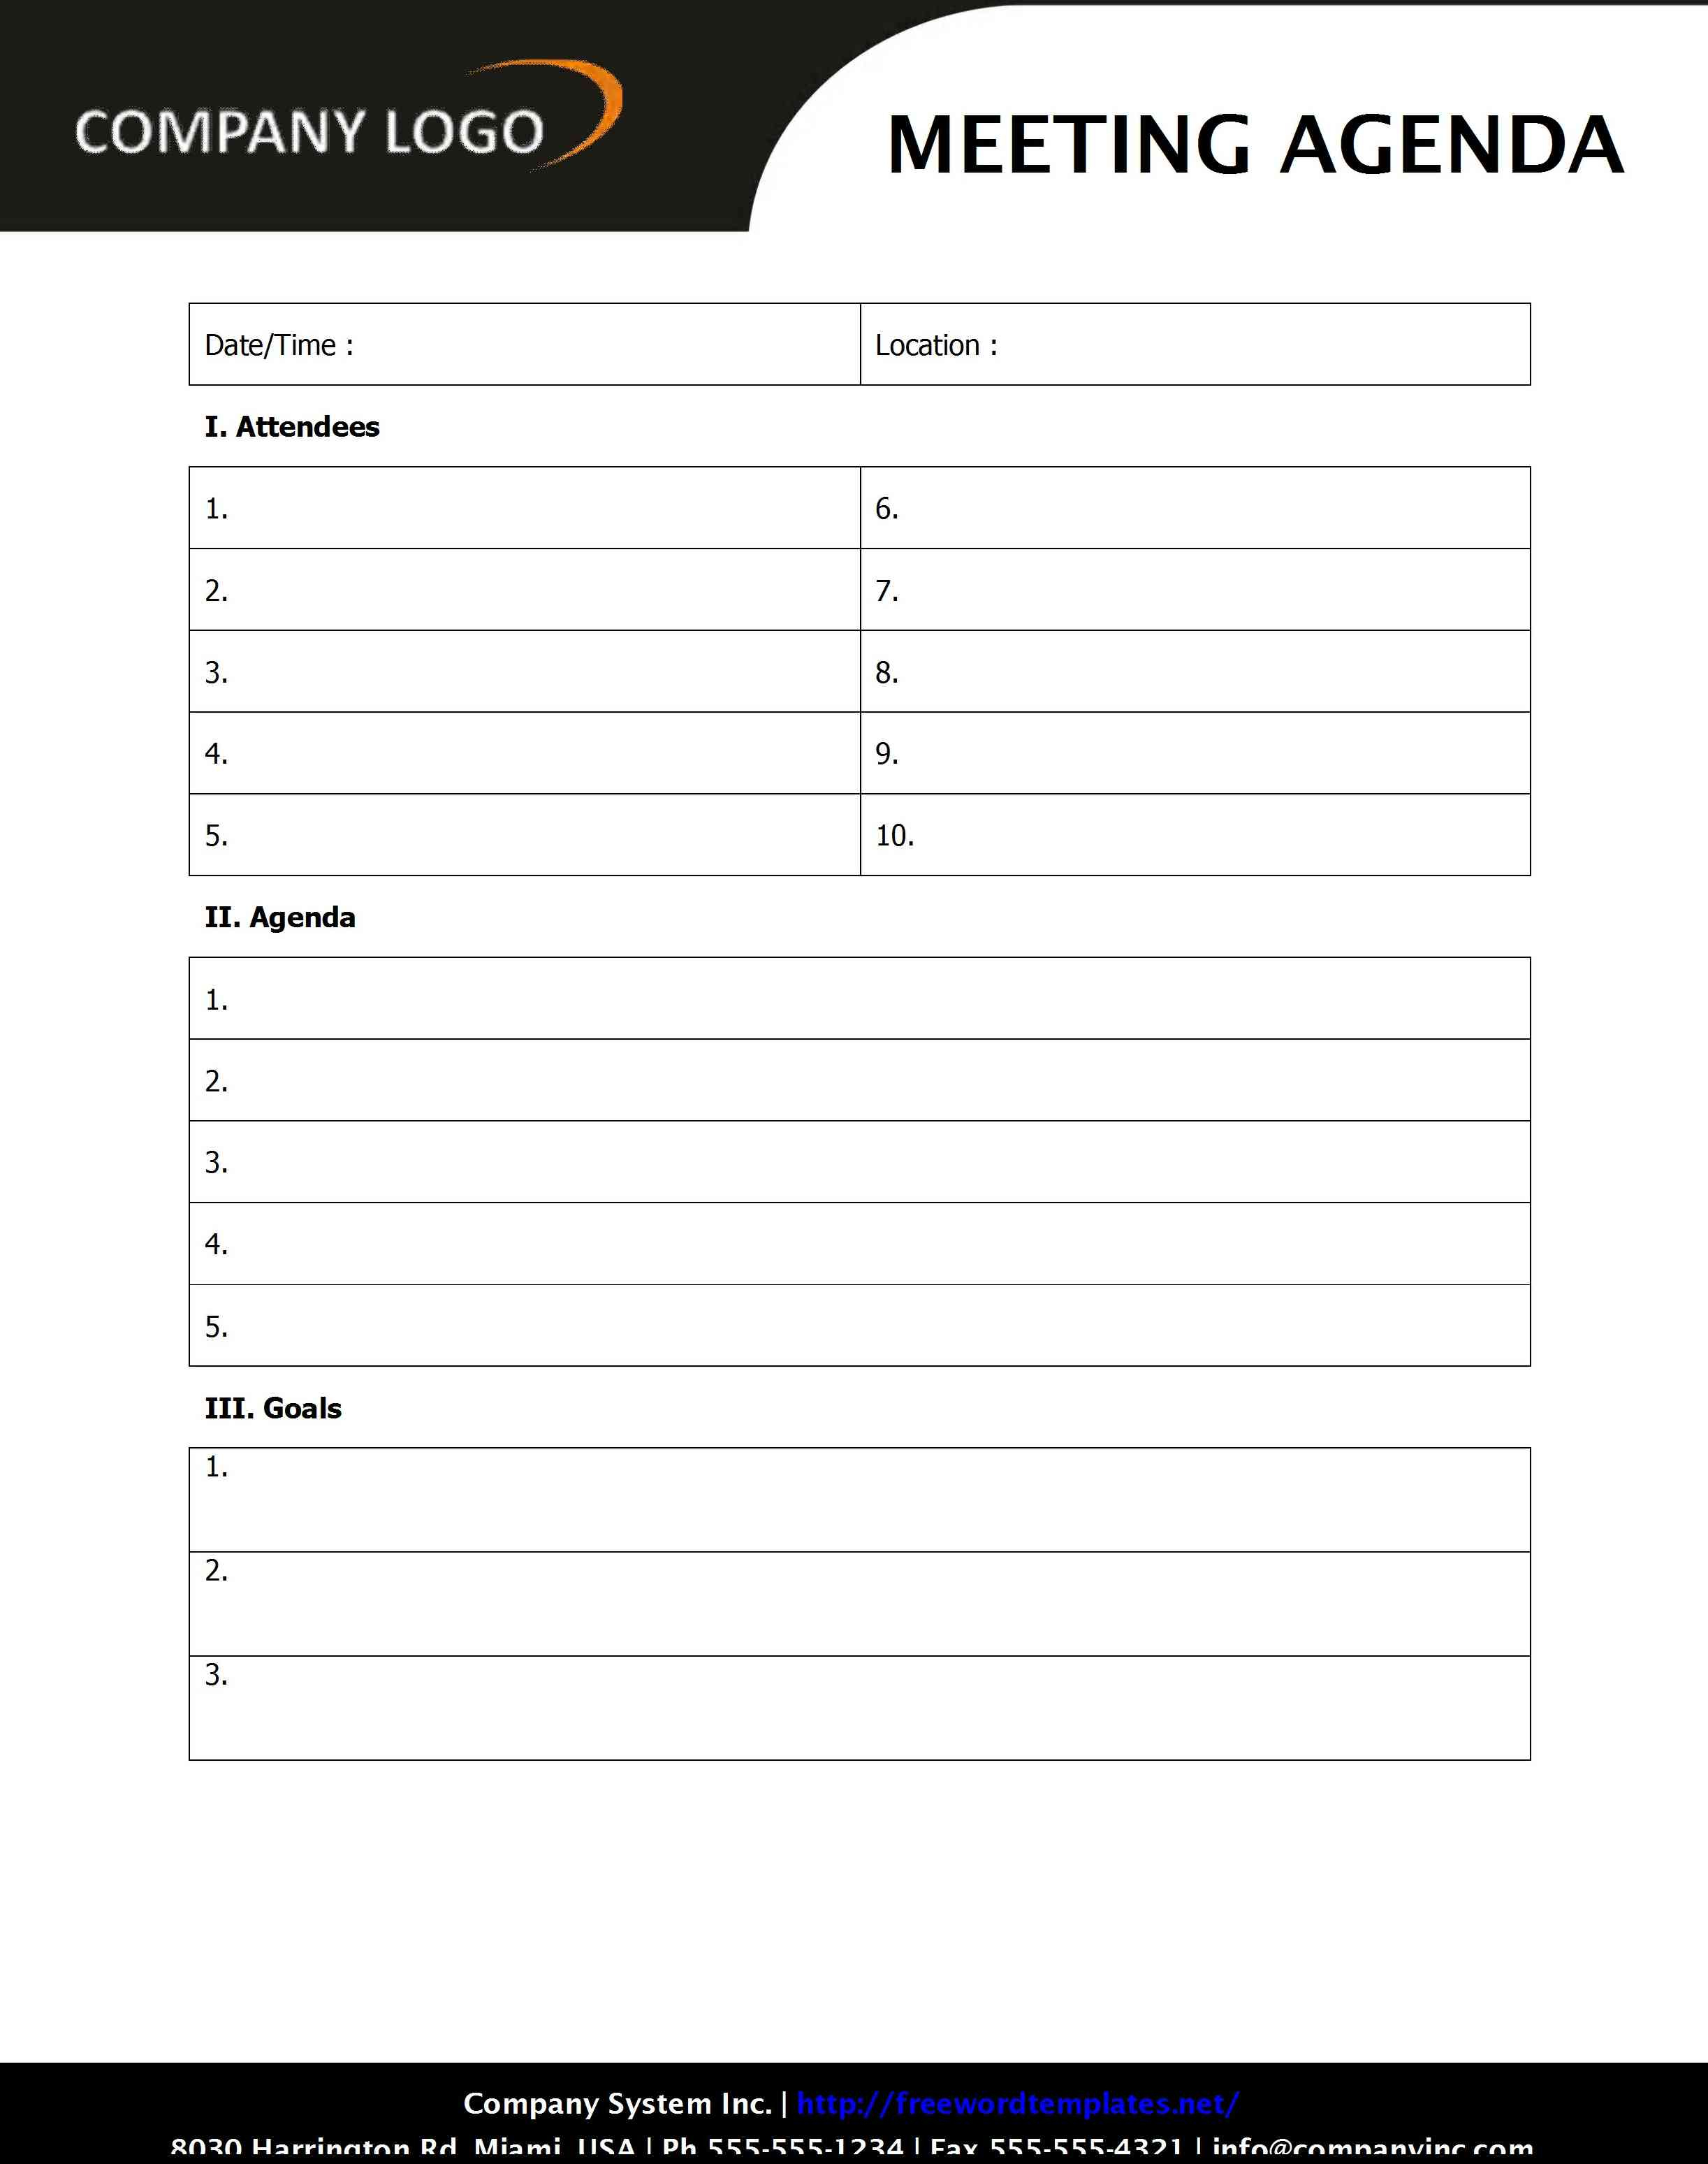 Meeting Agenda For Agenda Template Word 2010 With Regard To Agenda Template Word 2010